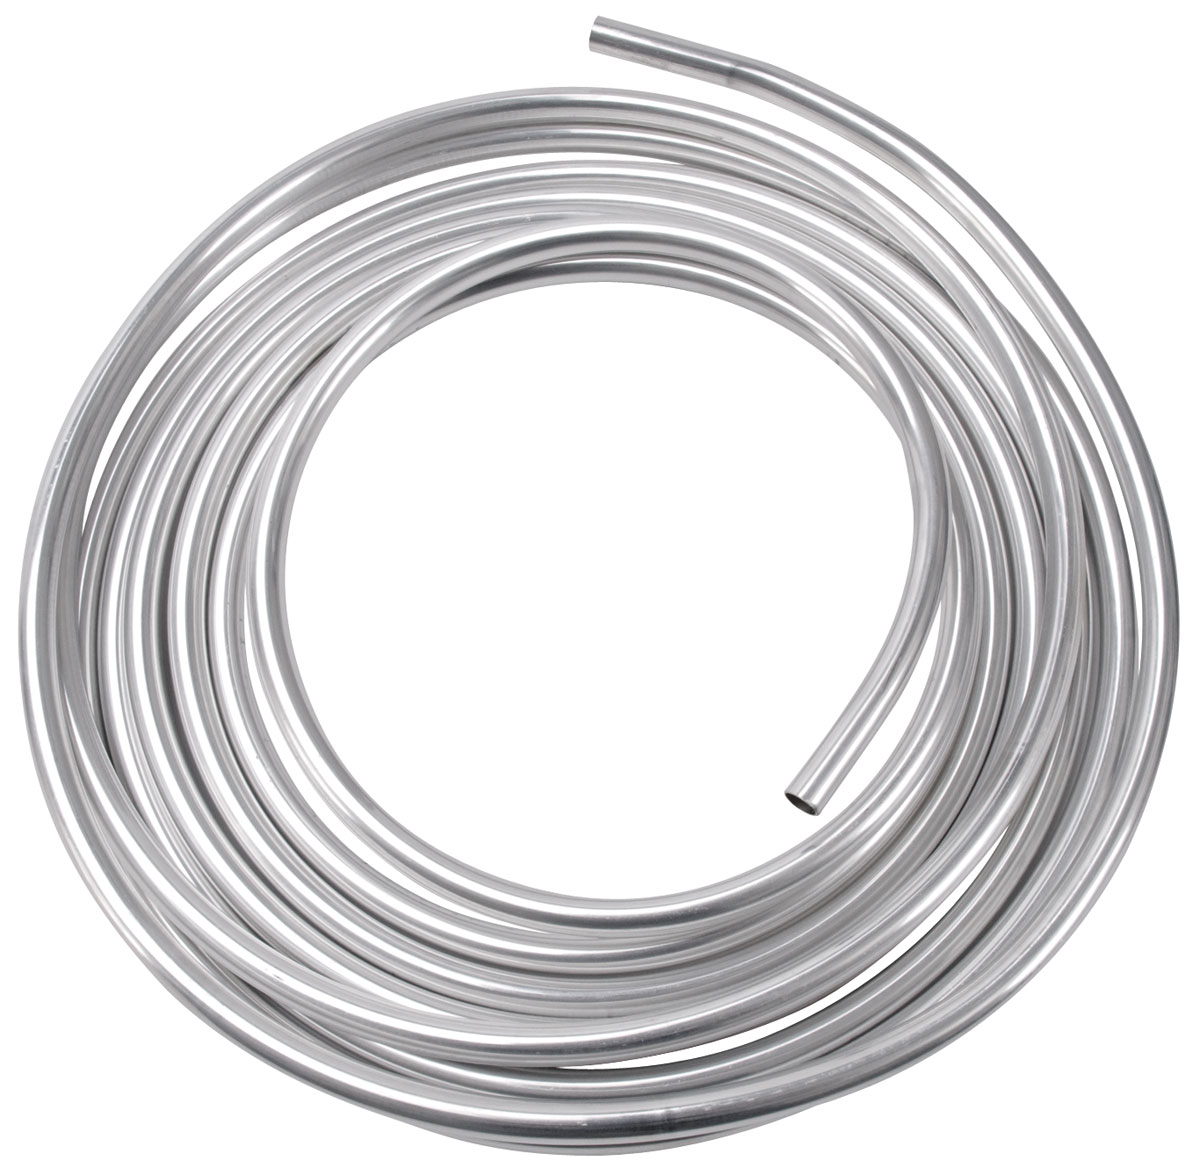 Fuel Line, Aluminum, Russell, 3/8, Natural, 25 Ft.